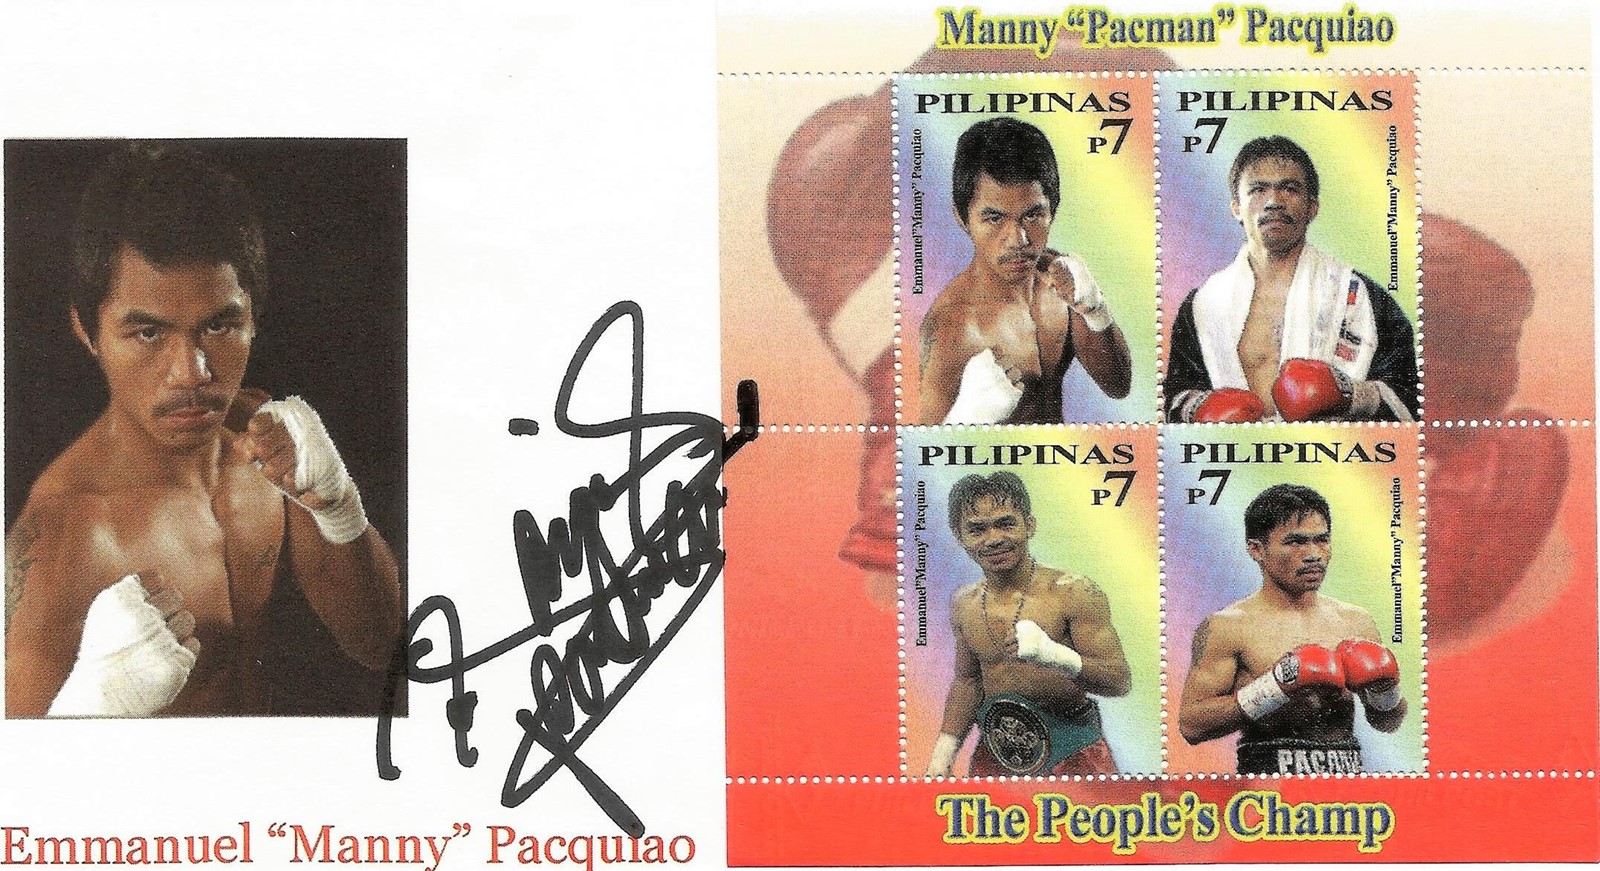 Boxing Manny Pacquiao signed official FDC The Peoples Champ Manny ""Pacman"" Pacquiao. Good